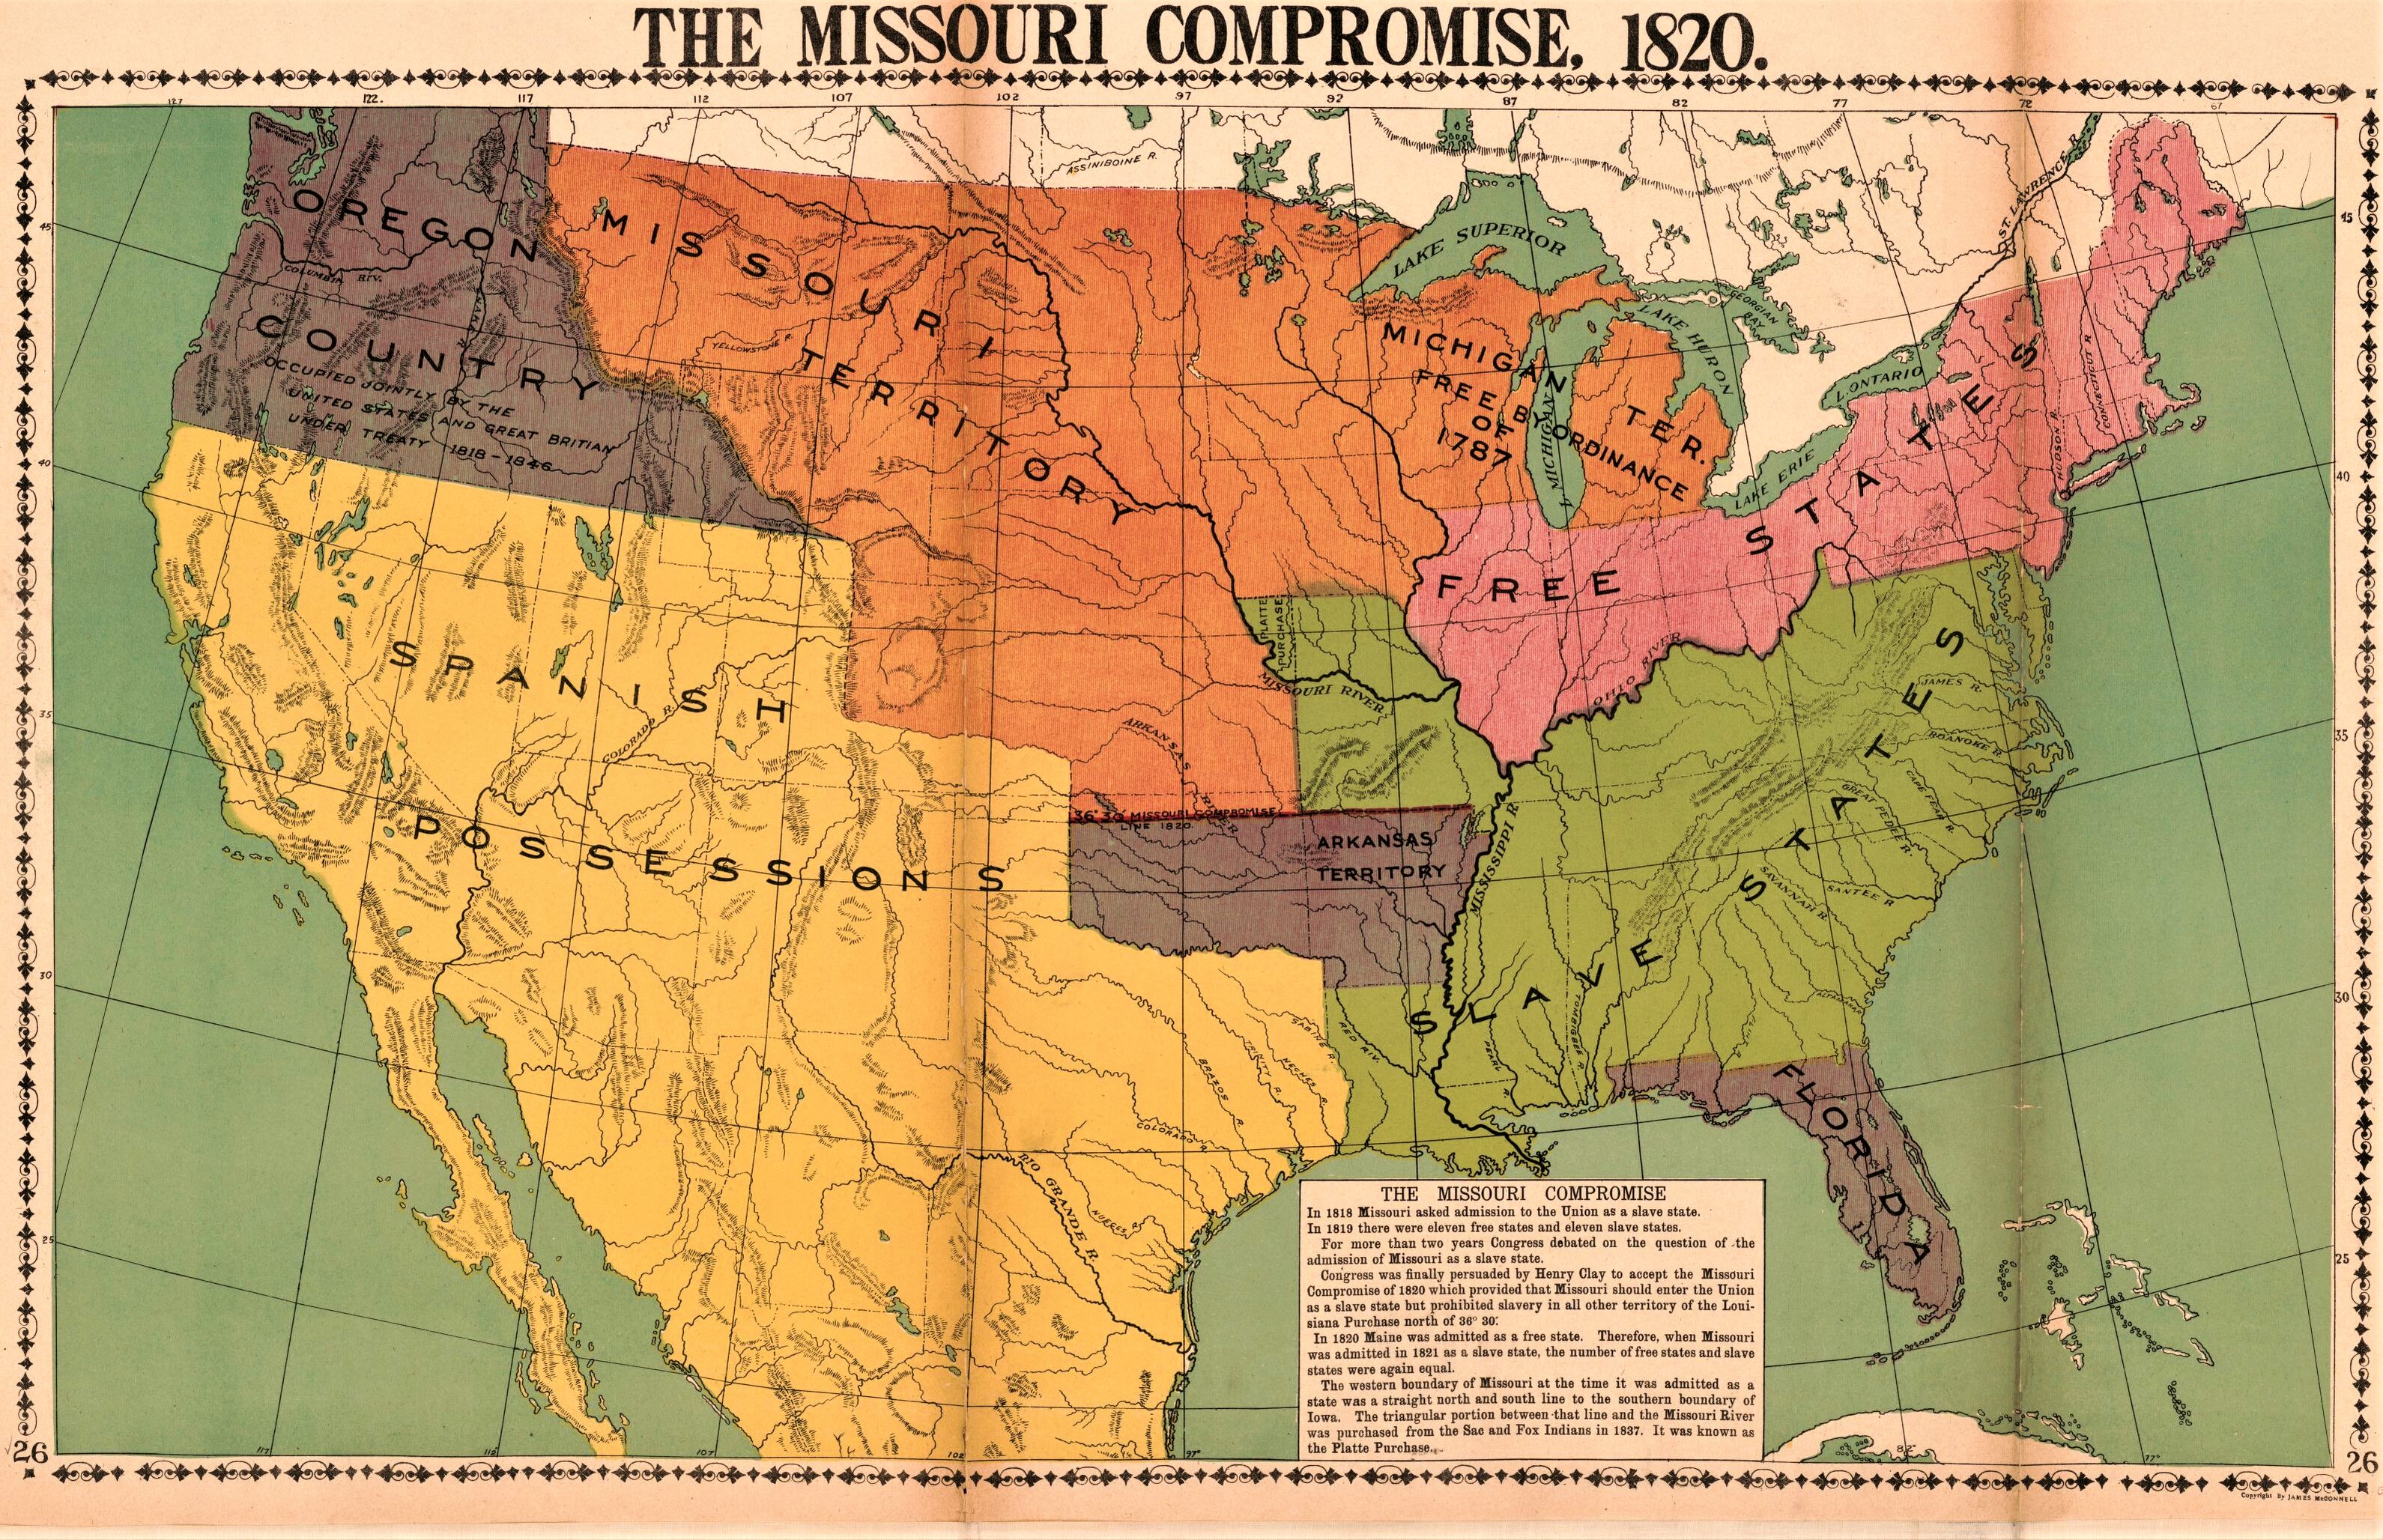 three fifths compromise map